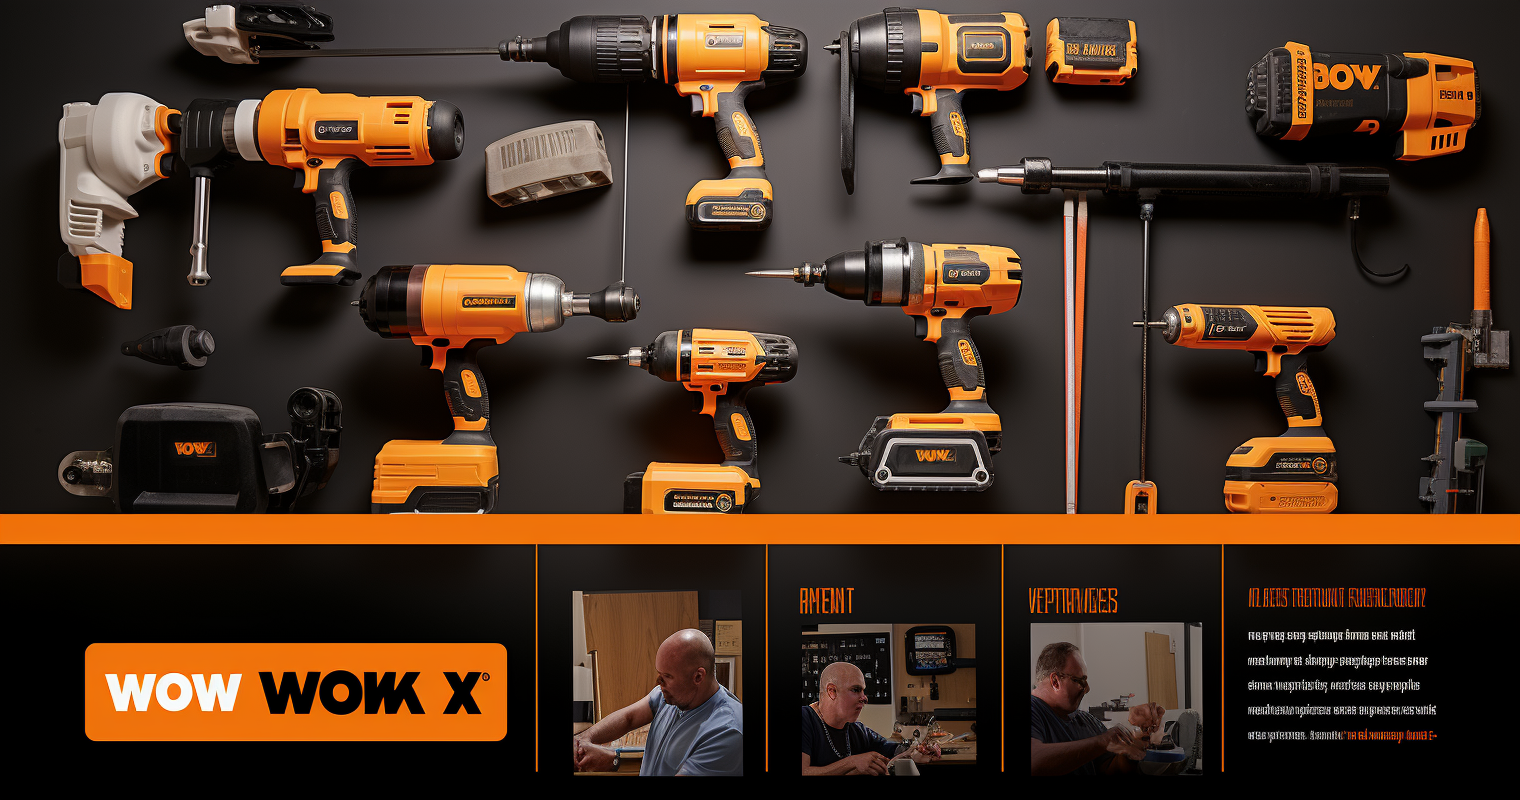 Worx Power Tools Customer Reviews in Collage Format